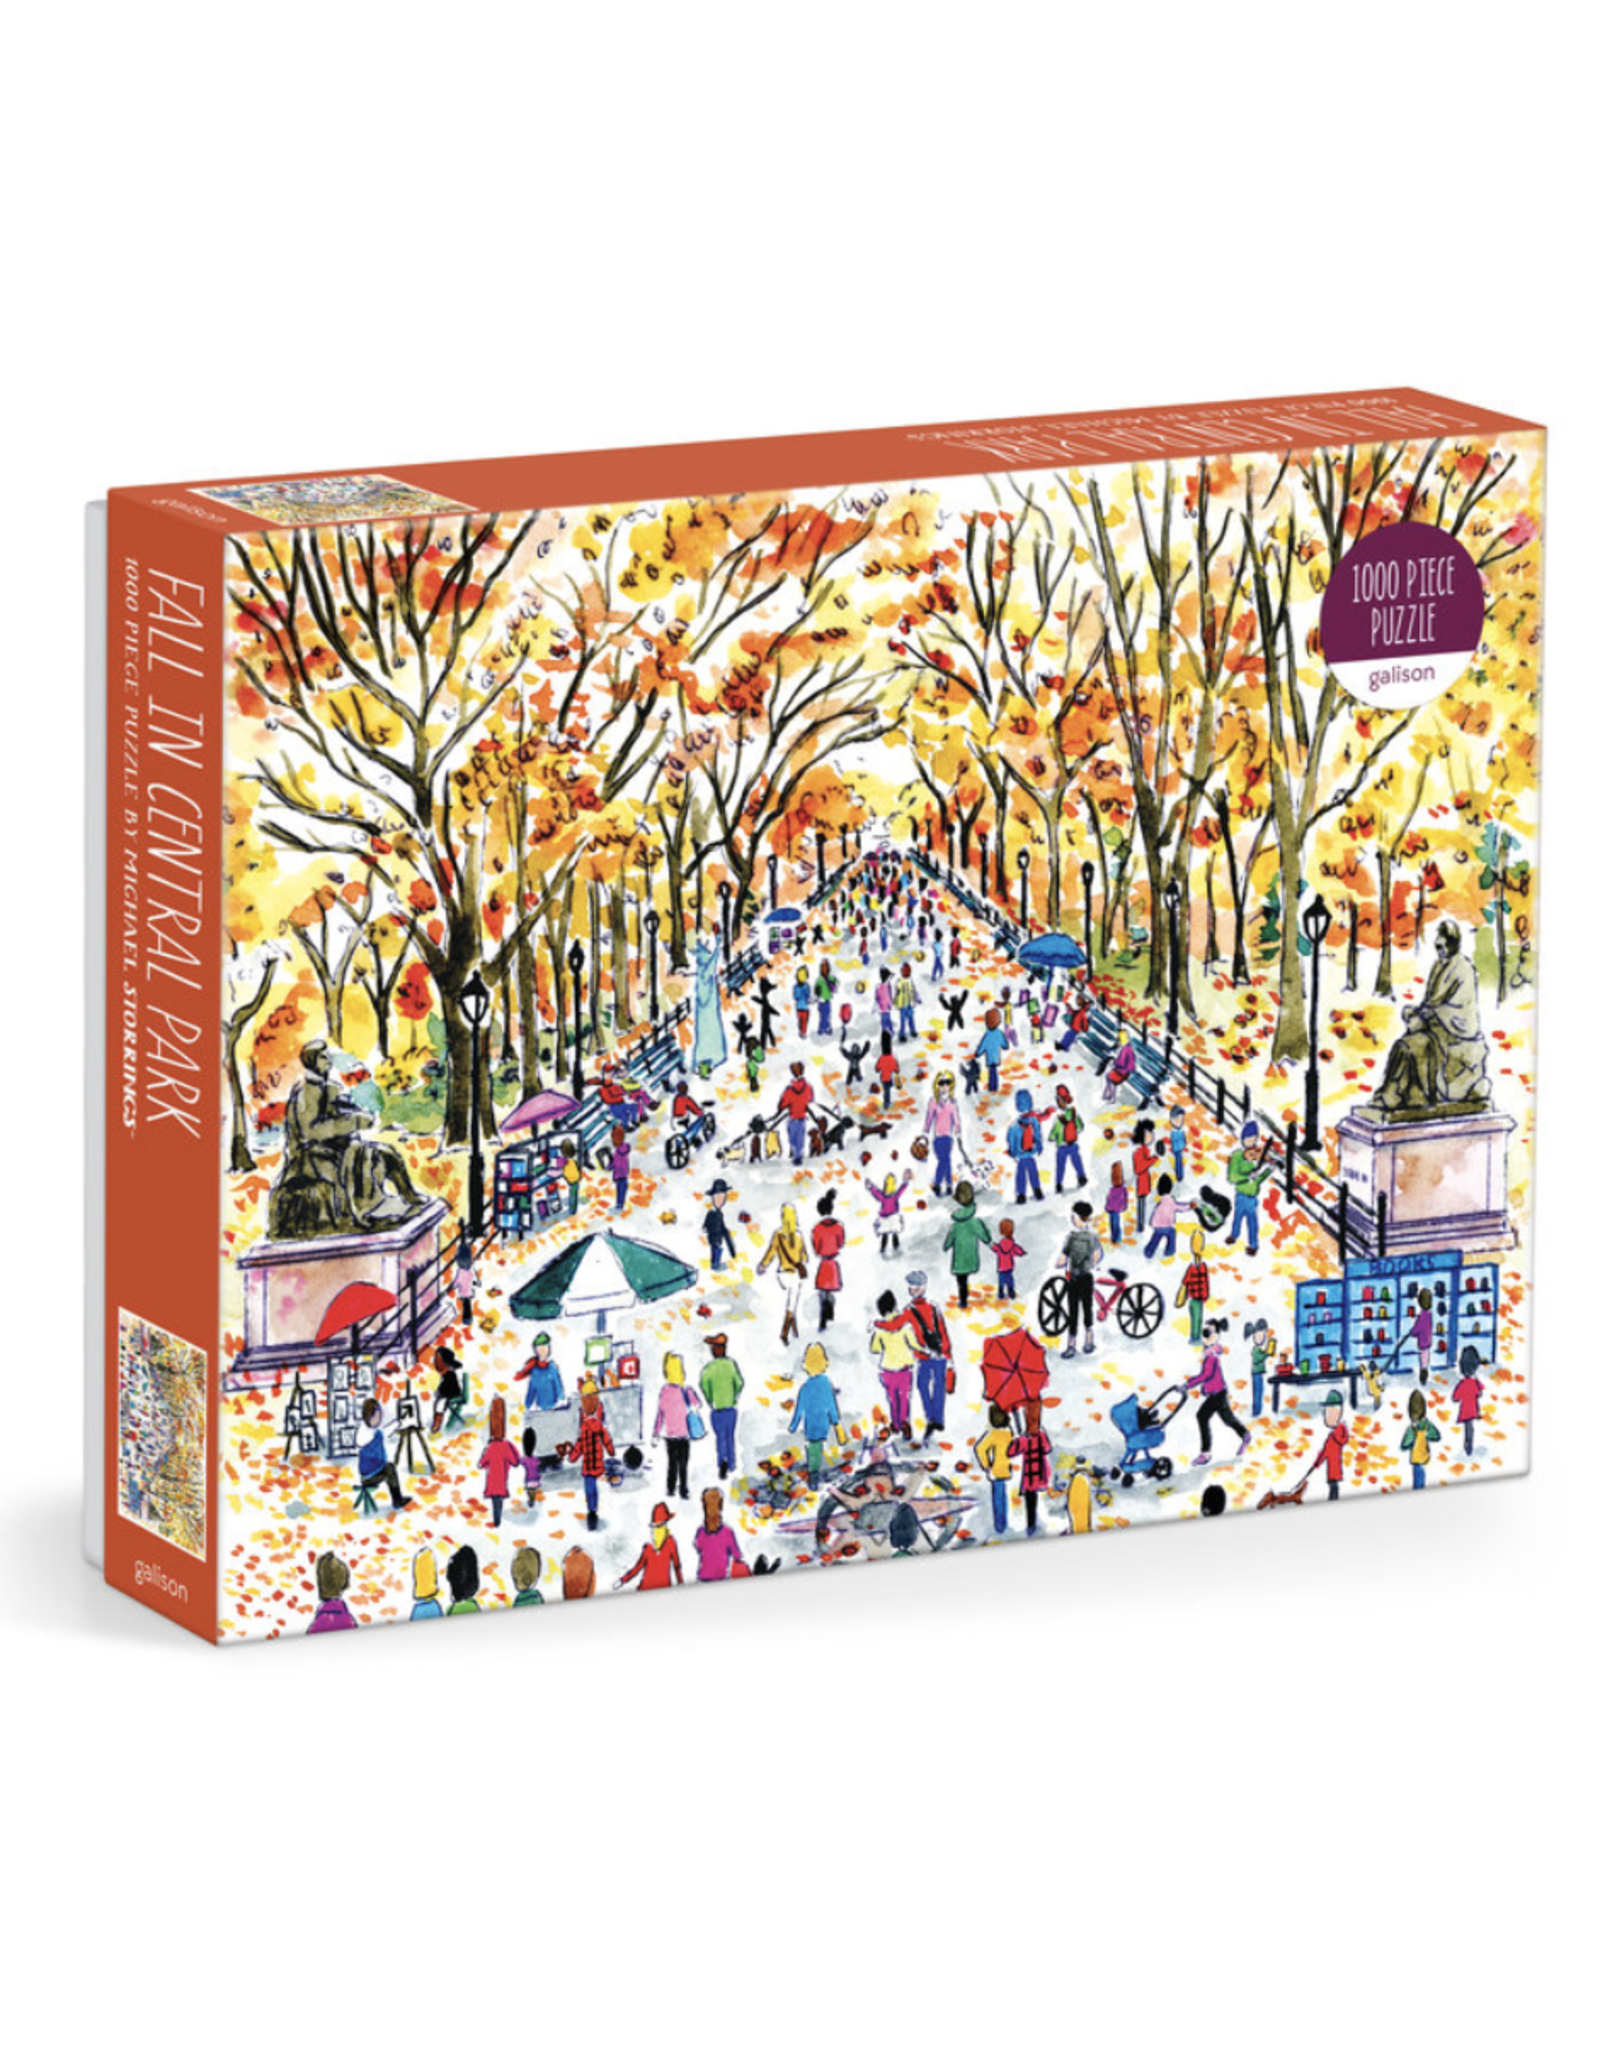 Michael Storrings Fall in Central Park - 1000 Piece Puzzle